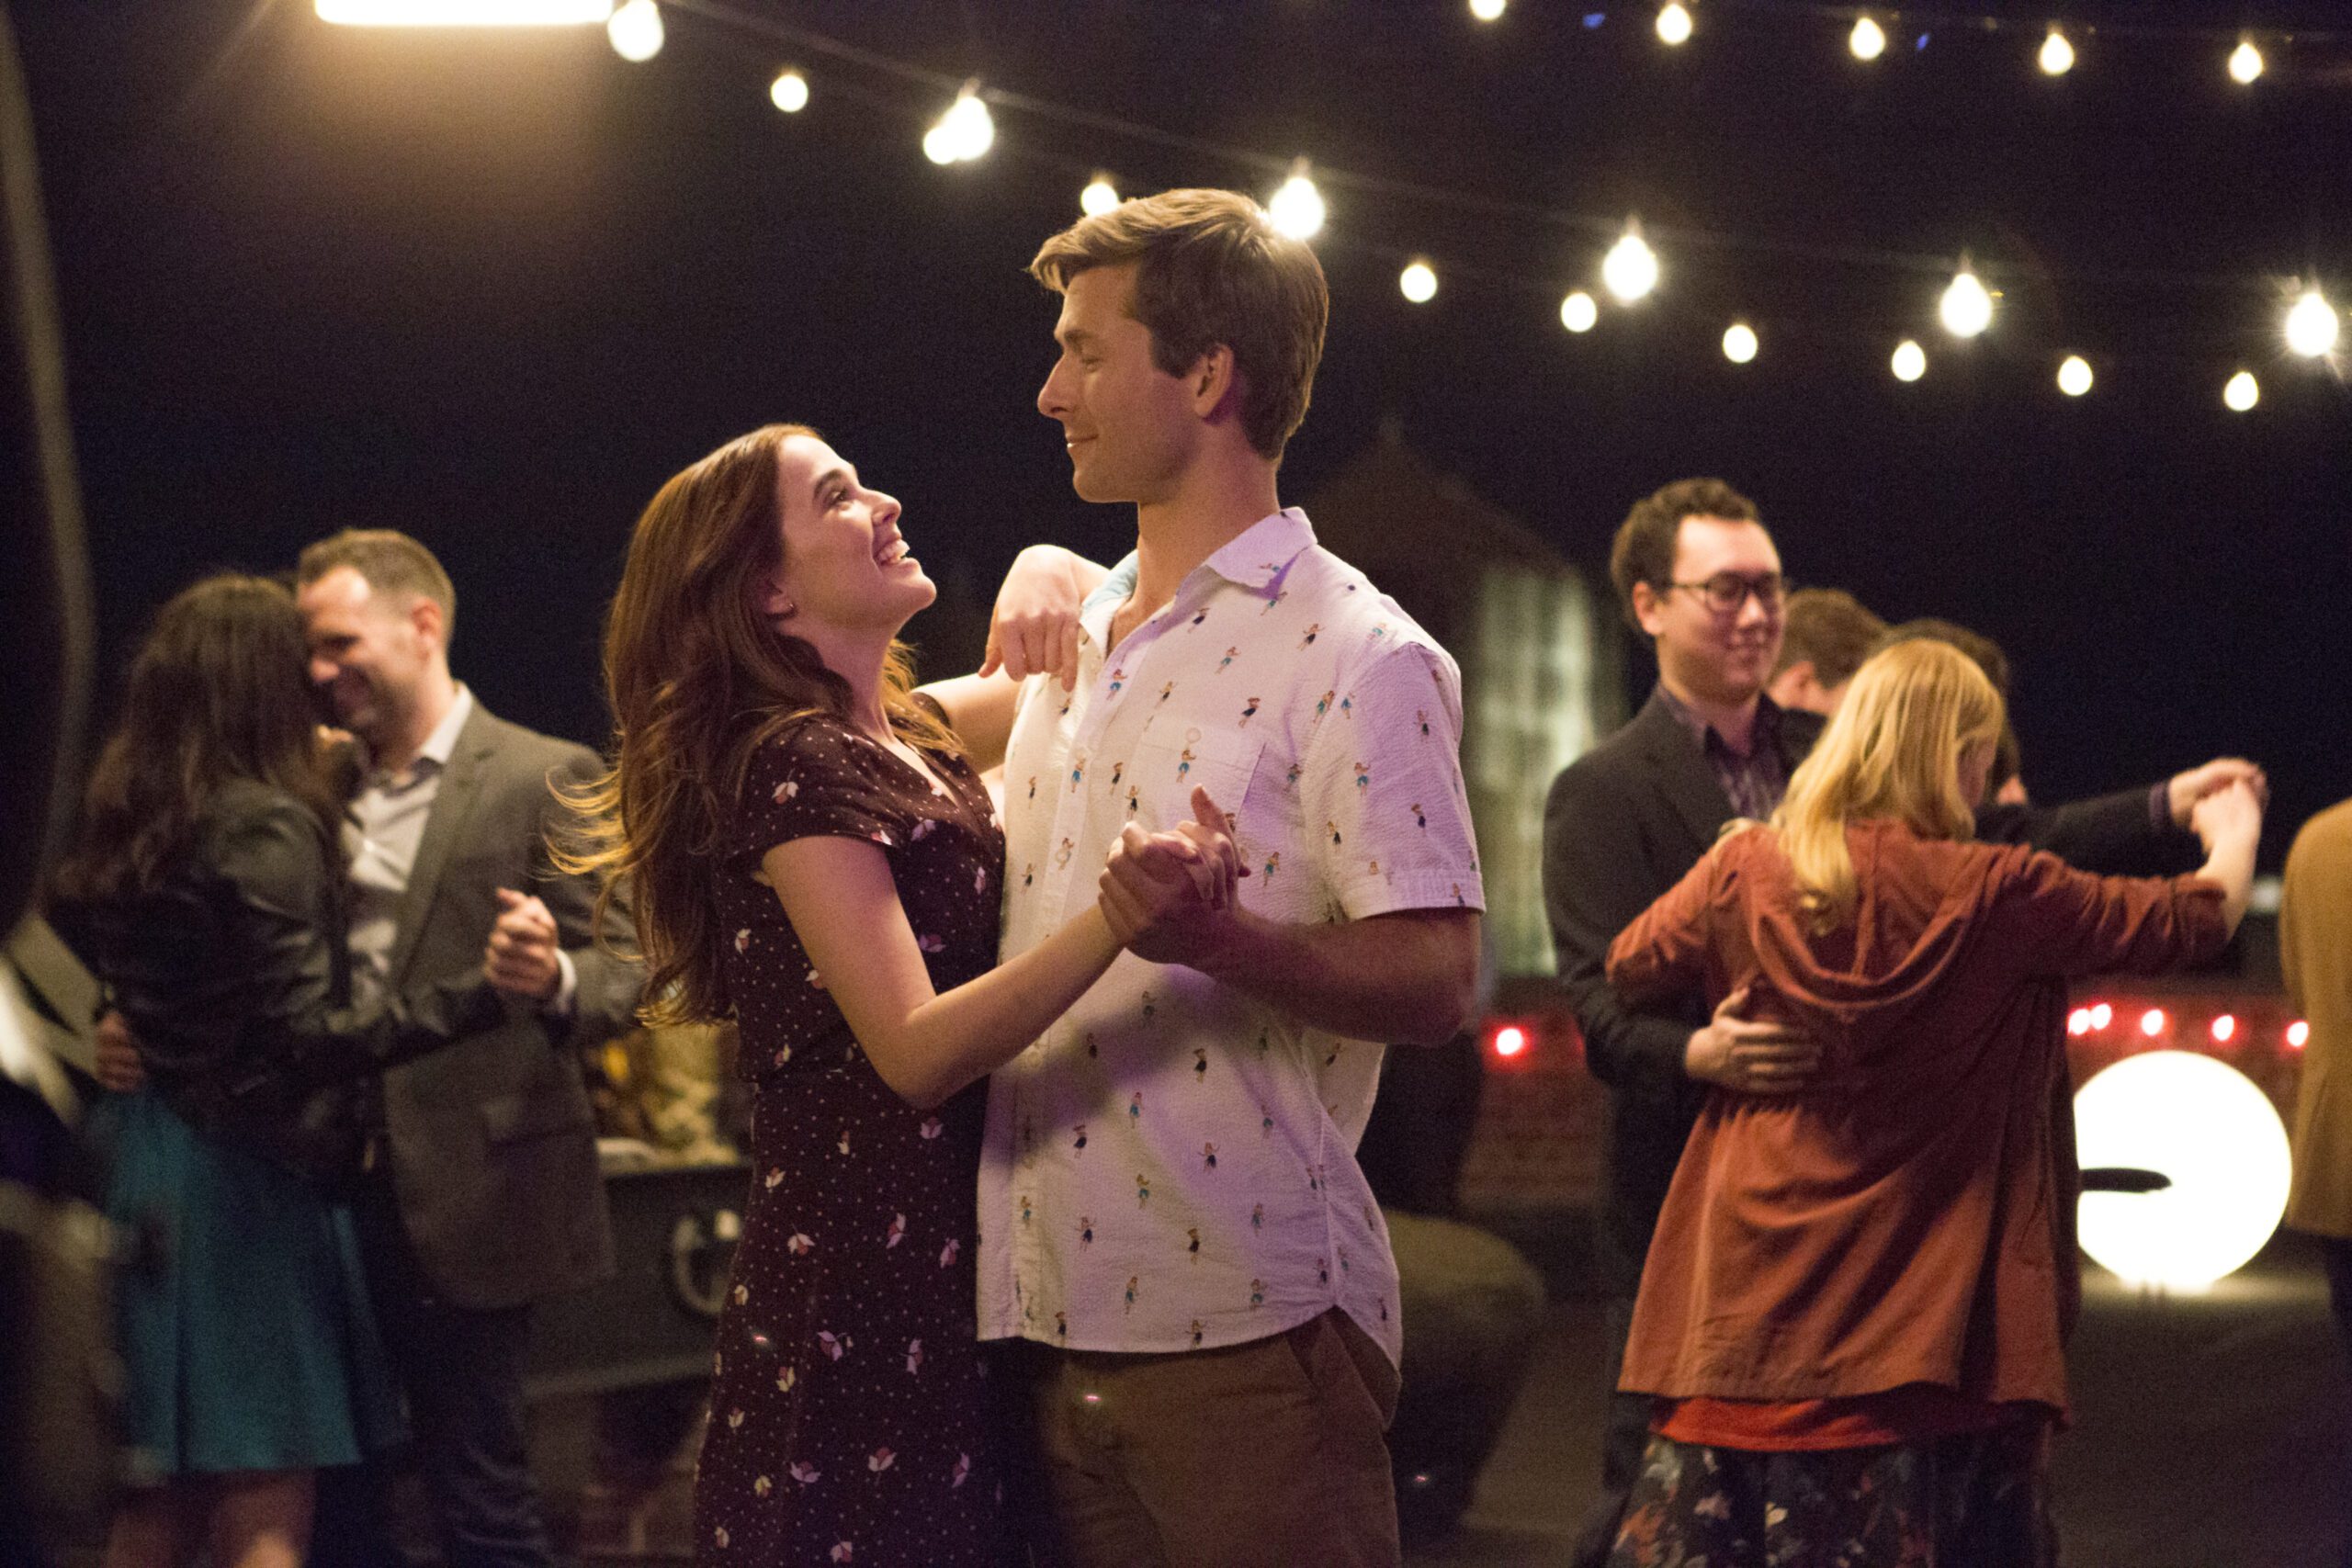 A man and woman dancing at a lively party unfolding in a heartwarming Netflix romantic comedy.